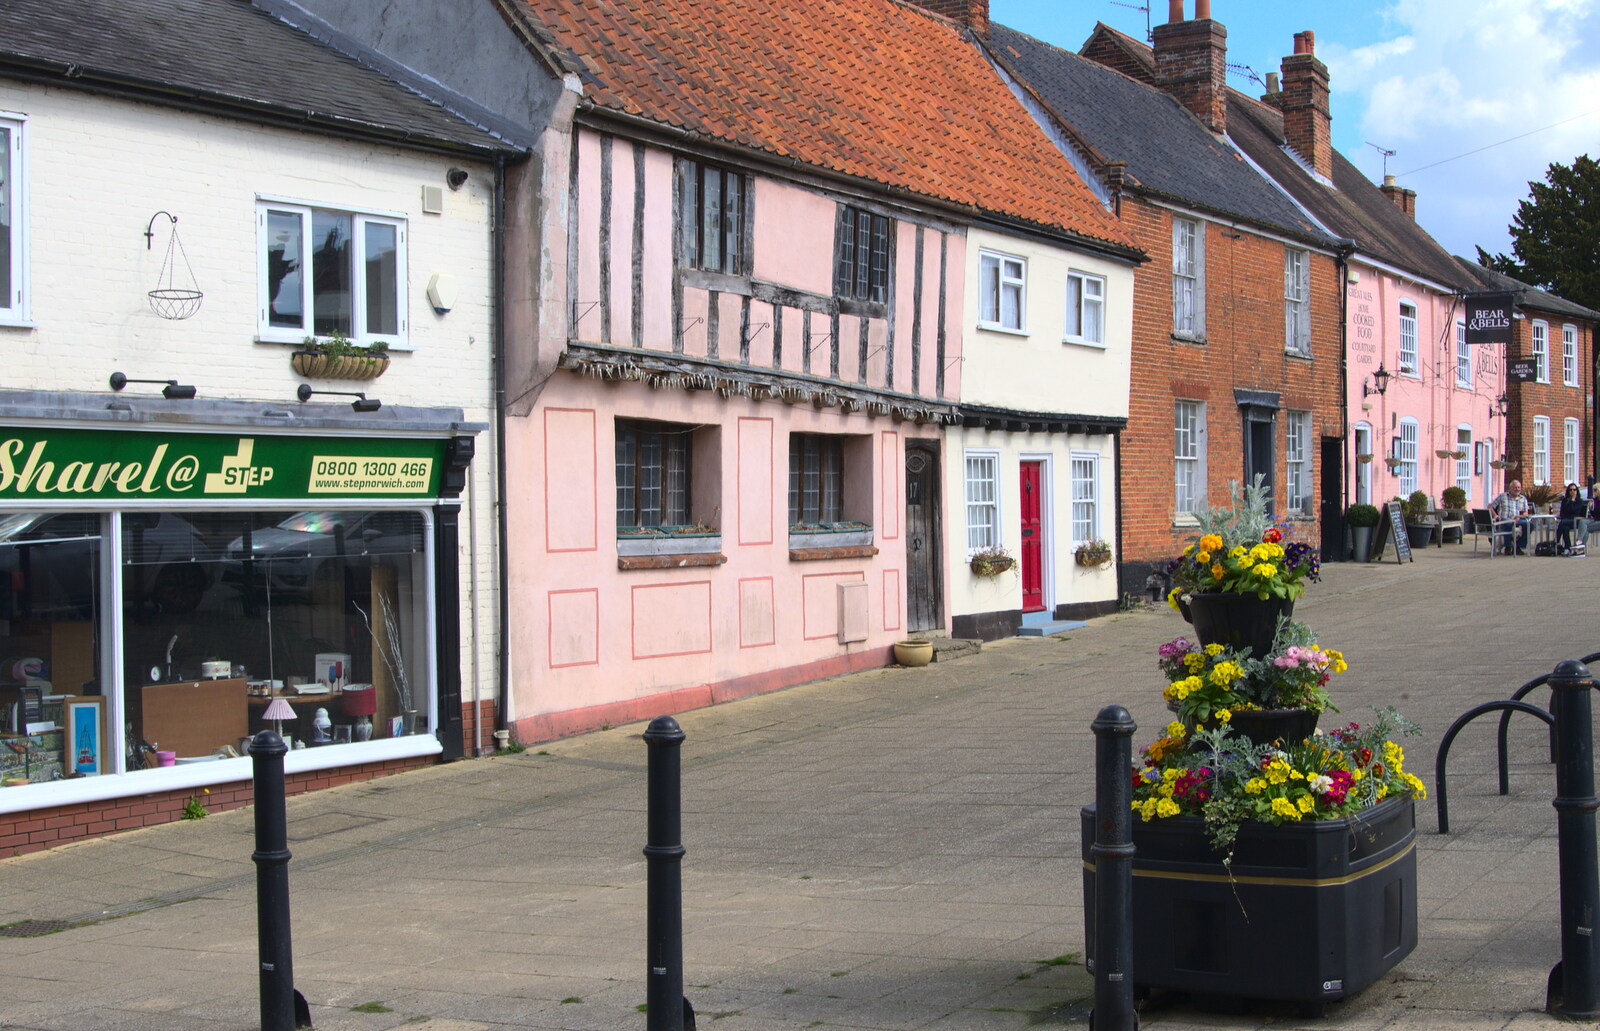 Beccles shops from A Postcard from Beccles, Suffolk - 2nd April 2017